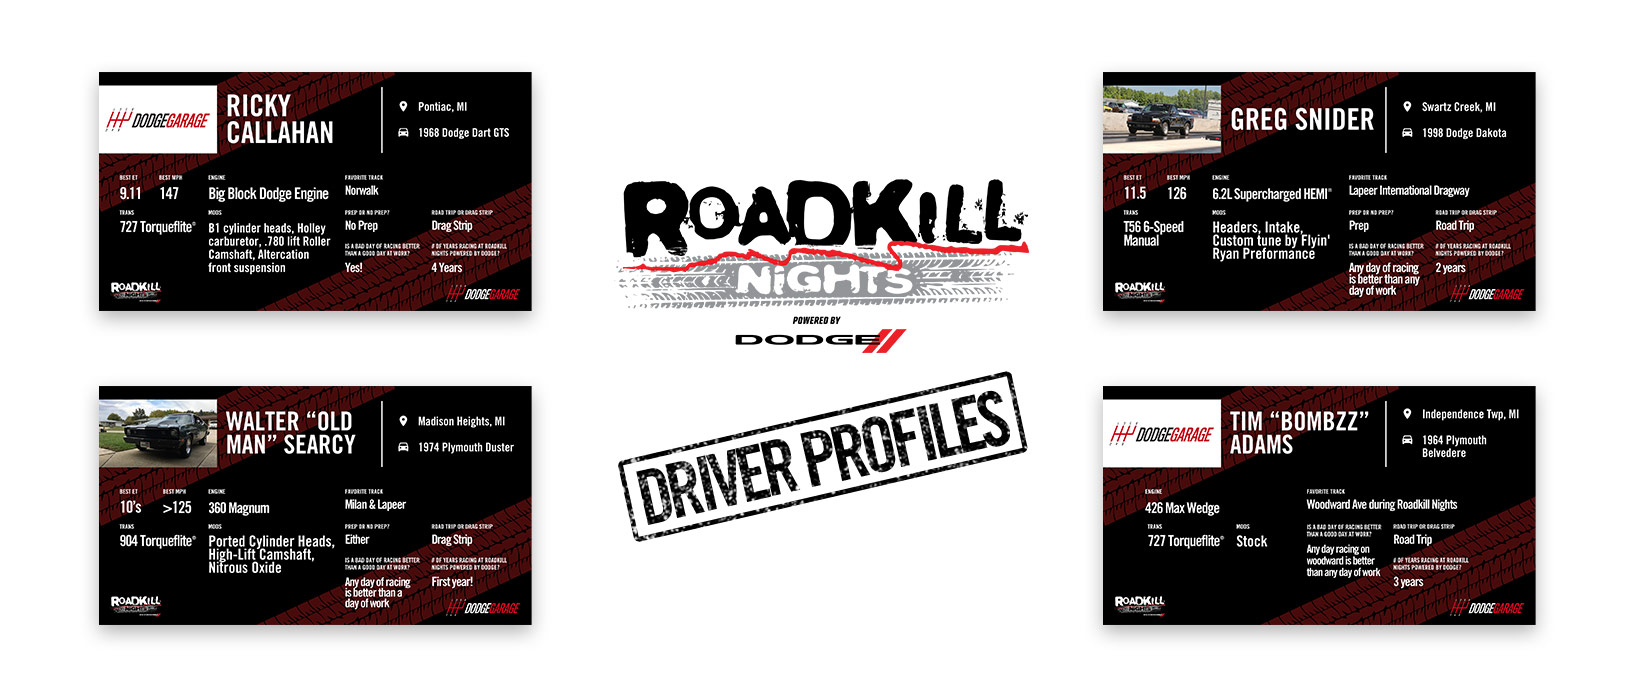 Meet the next group of Roadkill Nights drag racers!